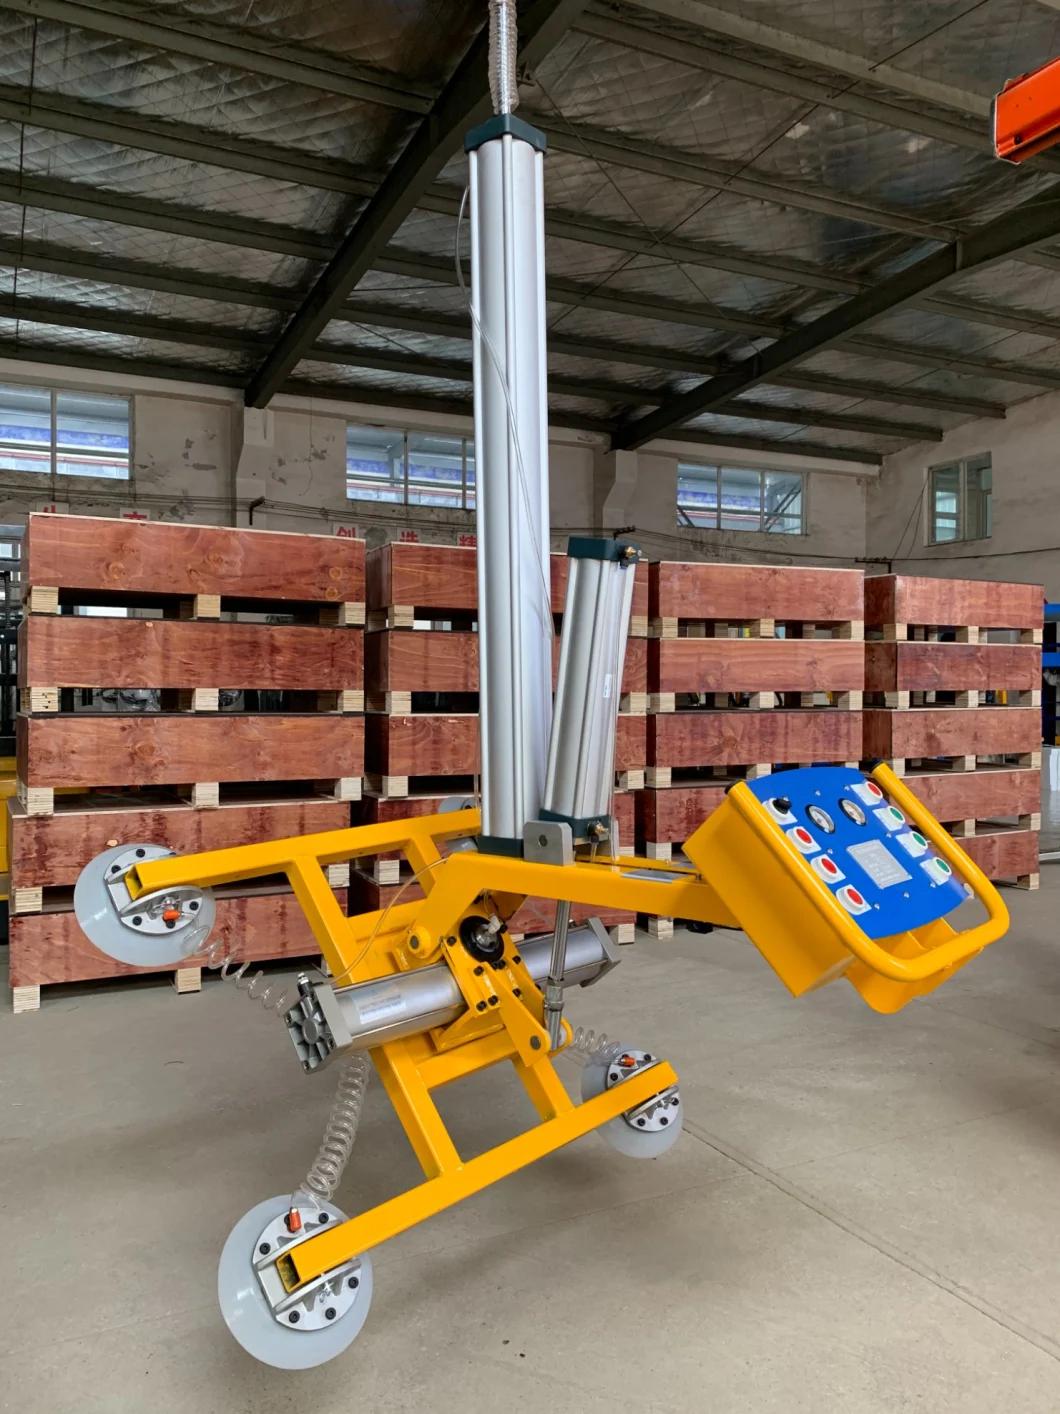 Air Source Control Glass Lifter with Working Capacity of 500kgs